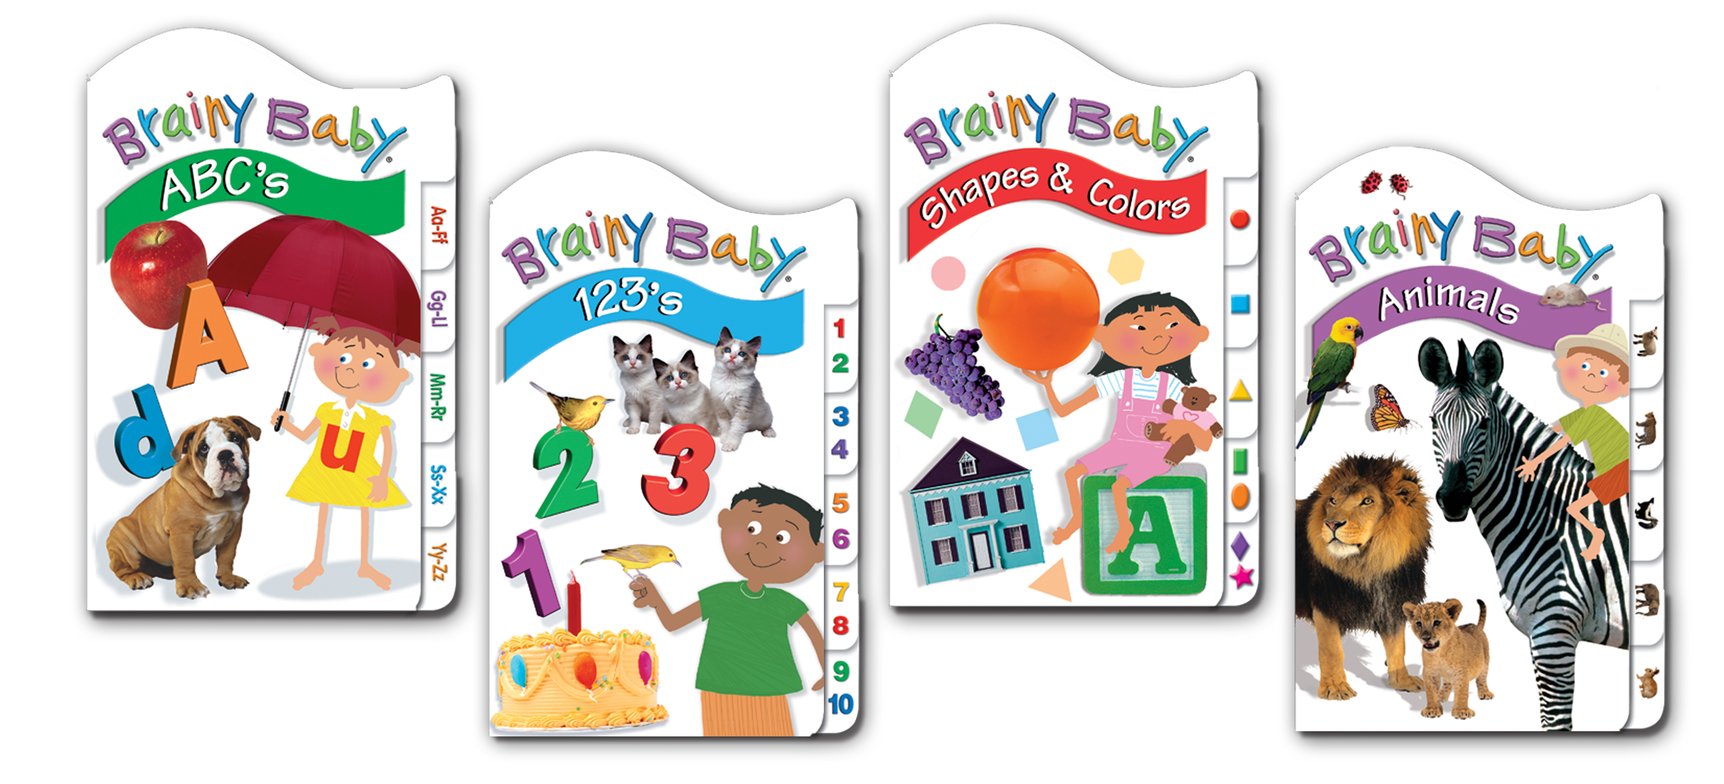 Brainy Baby Classic Tab Books, Animals, 123s, ABCs, Shapes and Colors | Brainy Babies